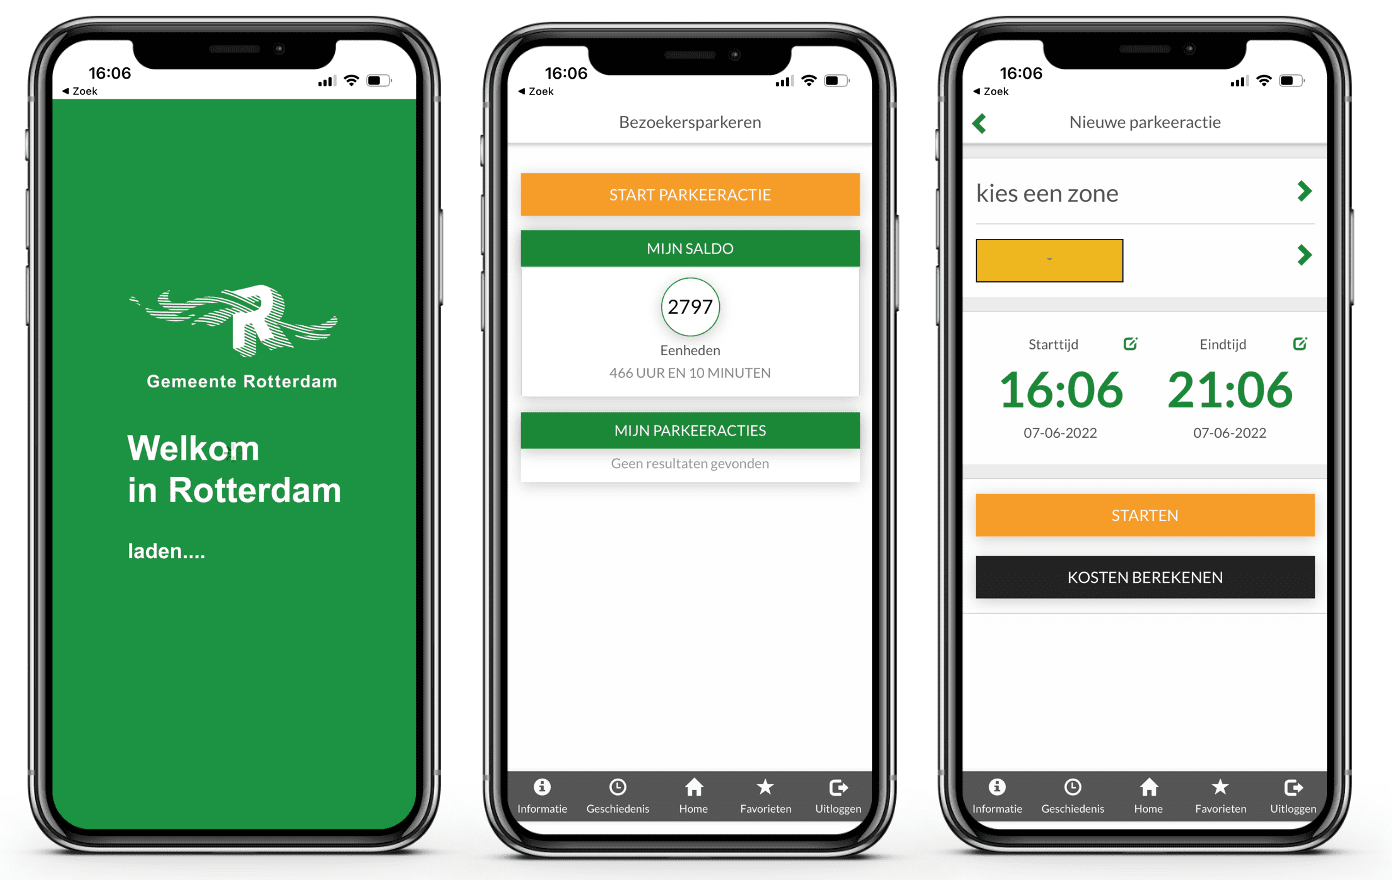 The RBP application allows visitors in Rotterdam to easily reserve parking spaces with their mobile phone.